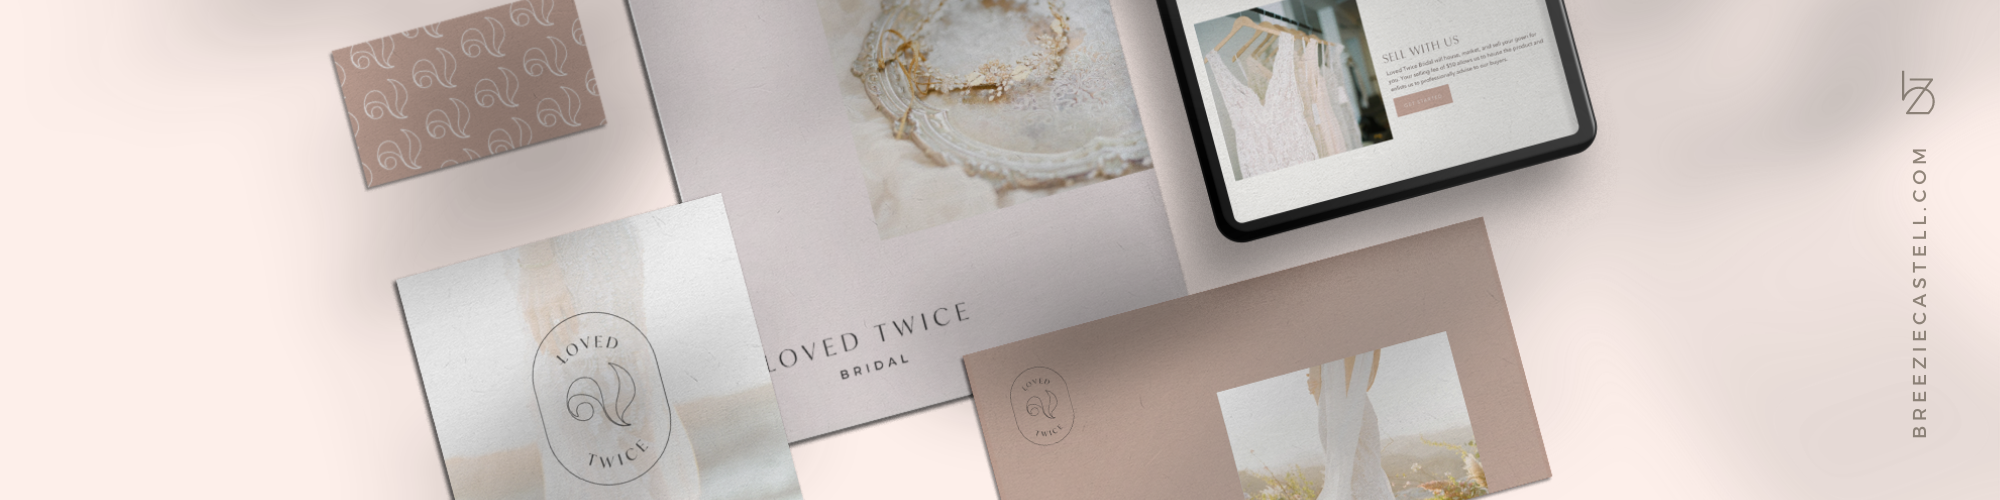 loved twice etsy banner.png